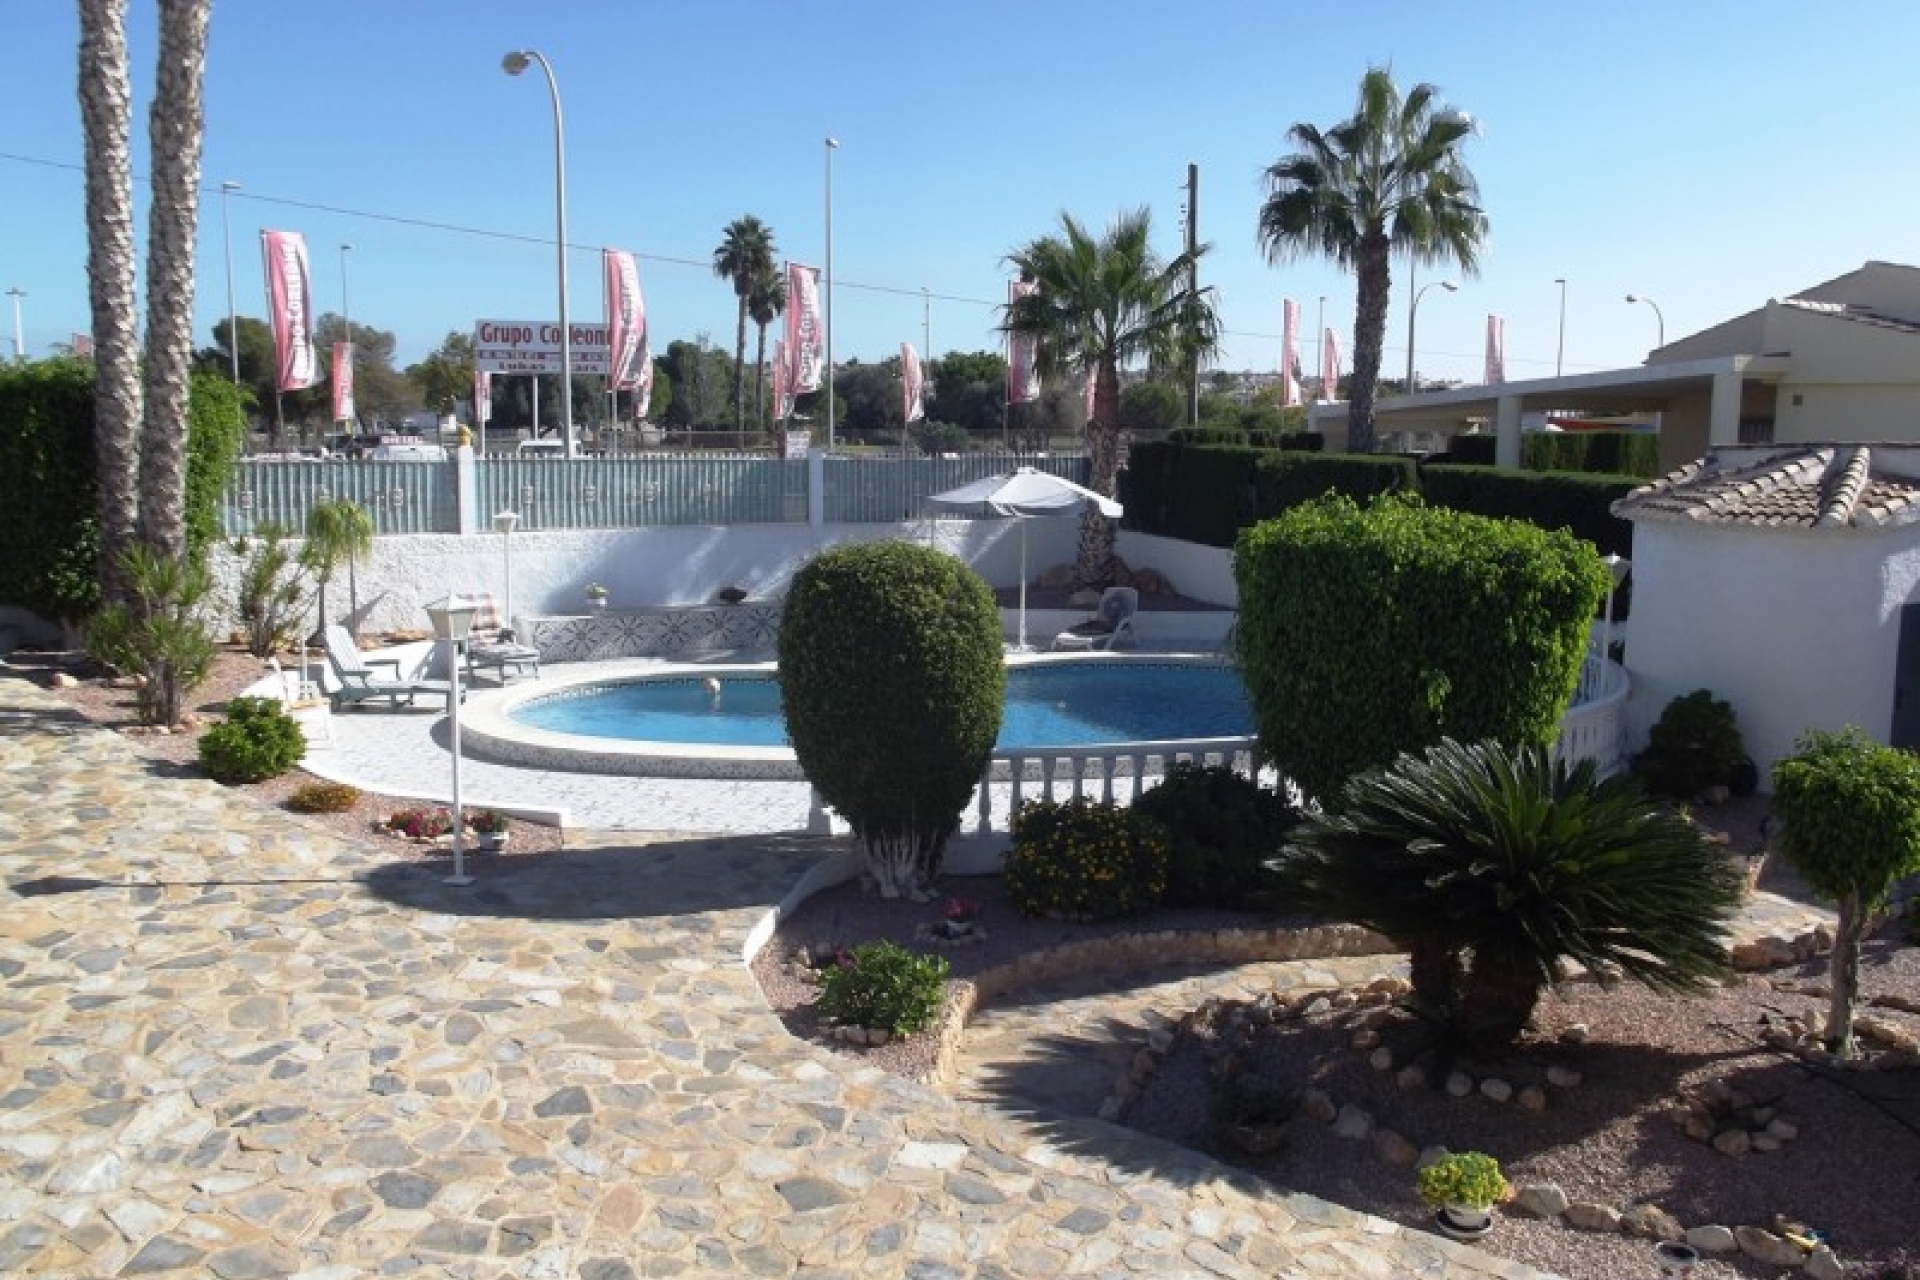 For sale property Spain costa blanca cheap bargain